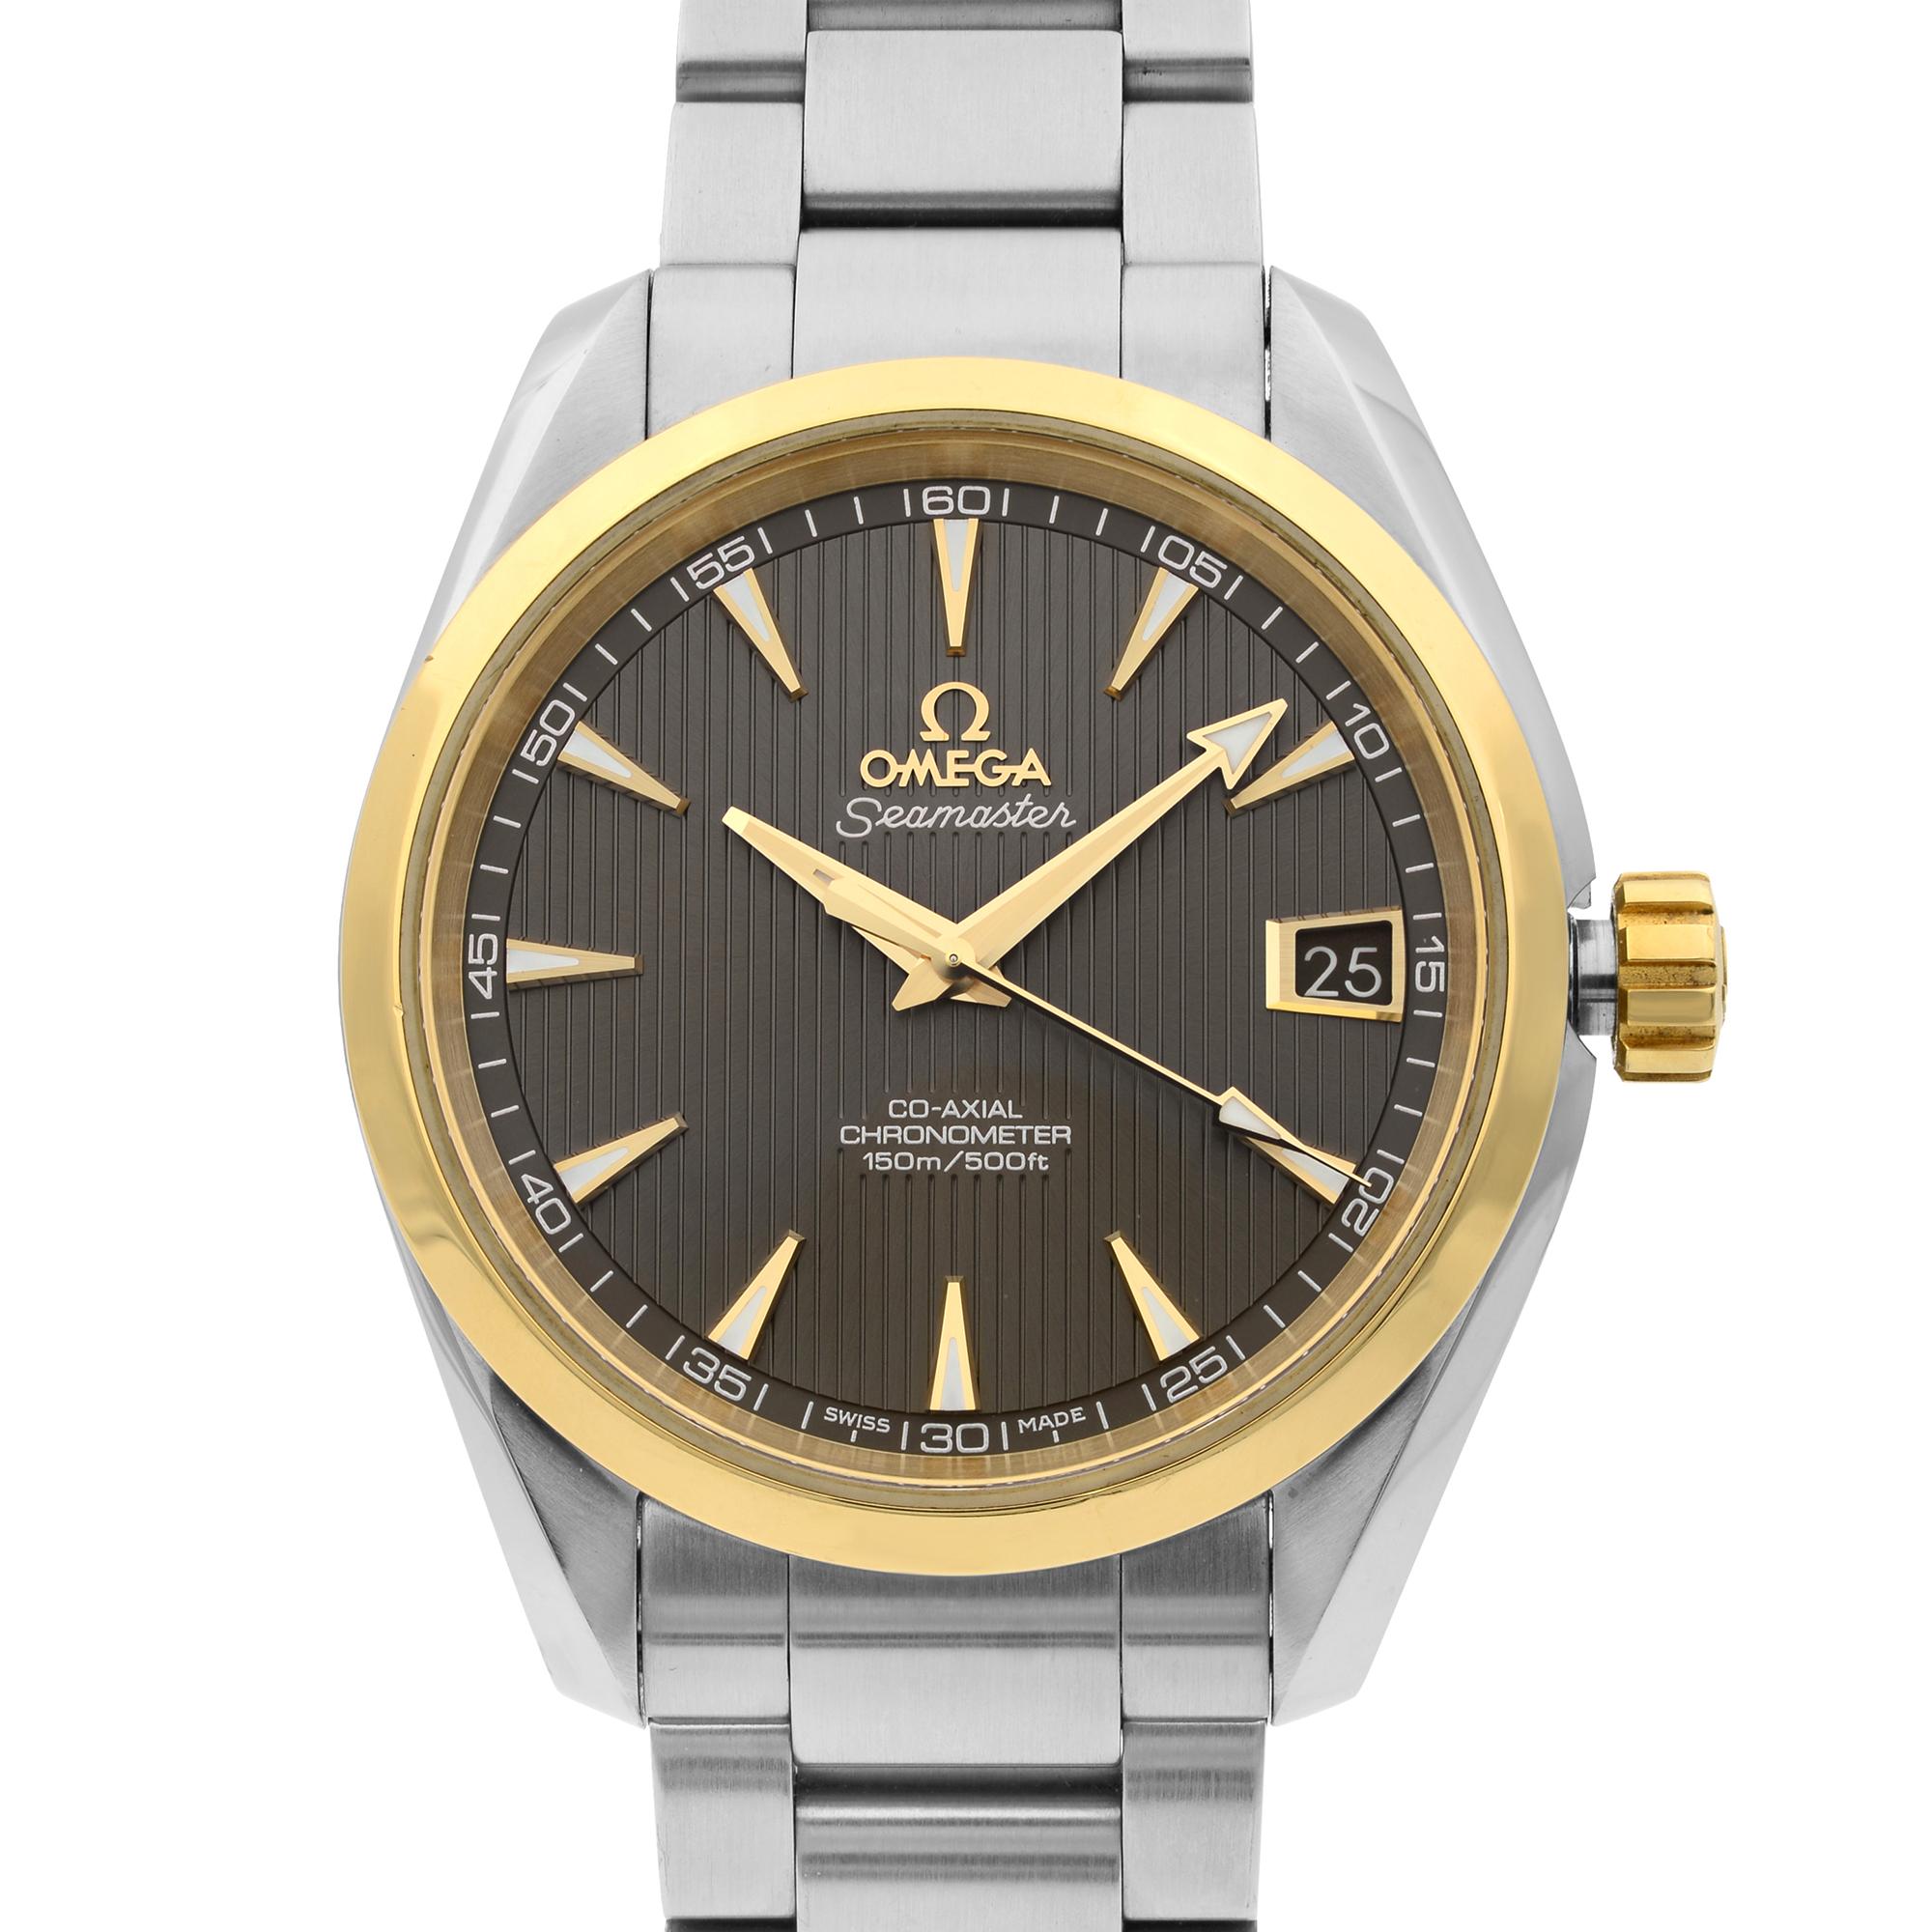 This display model Omega Seamaster 231.20.39.21.06.004 is a beautiful men's timepiece that is powered by mechanical (automatic) movement which is cased in a stainless steel case. It has a round shape face, date indicator dial and has hand sticks